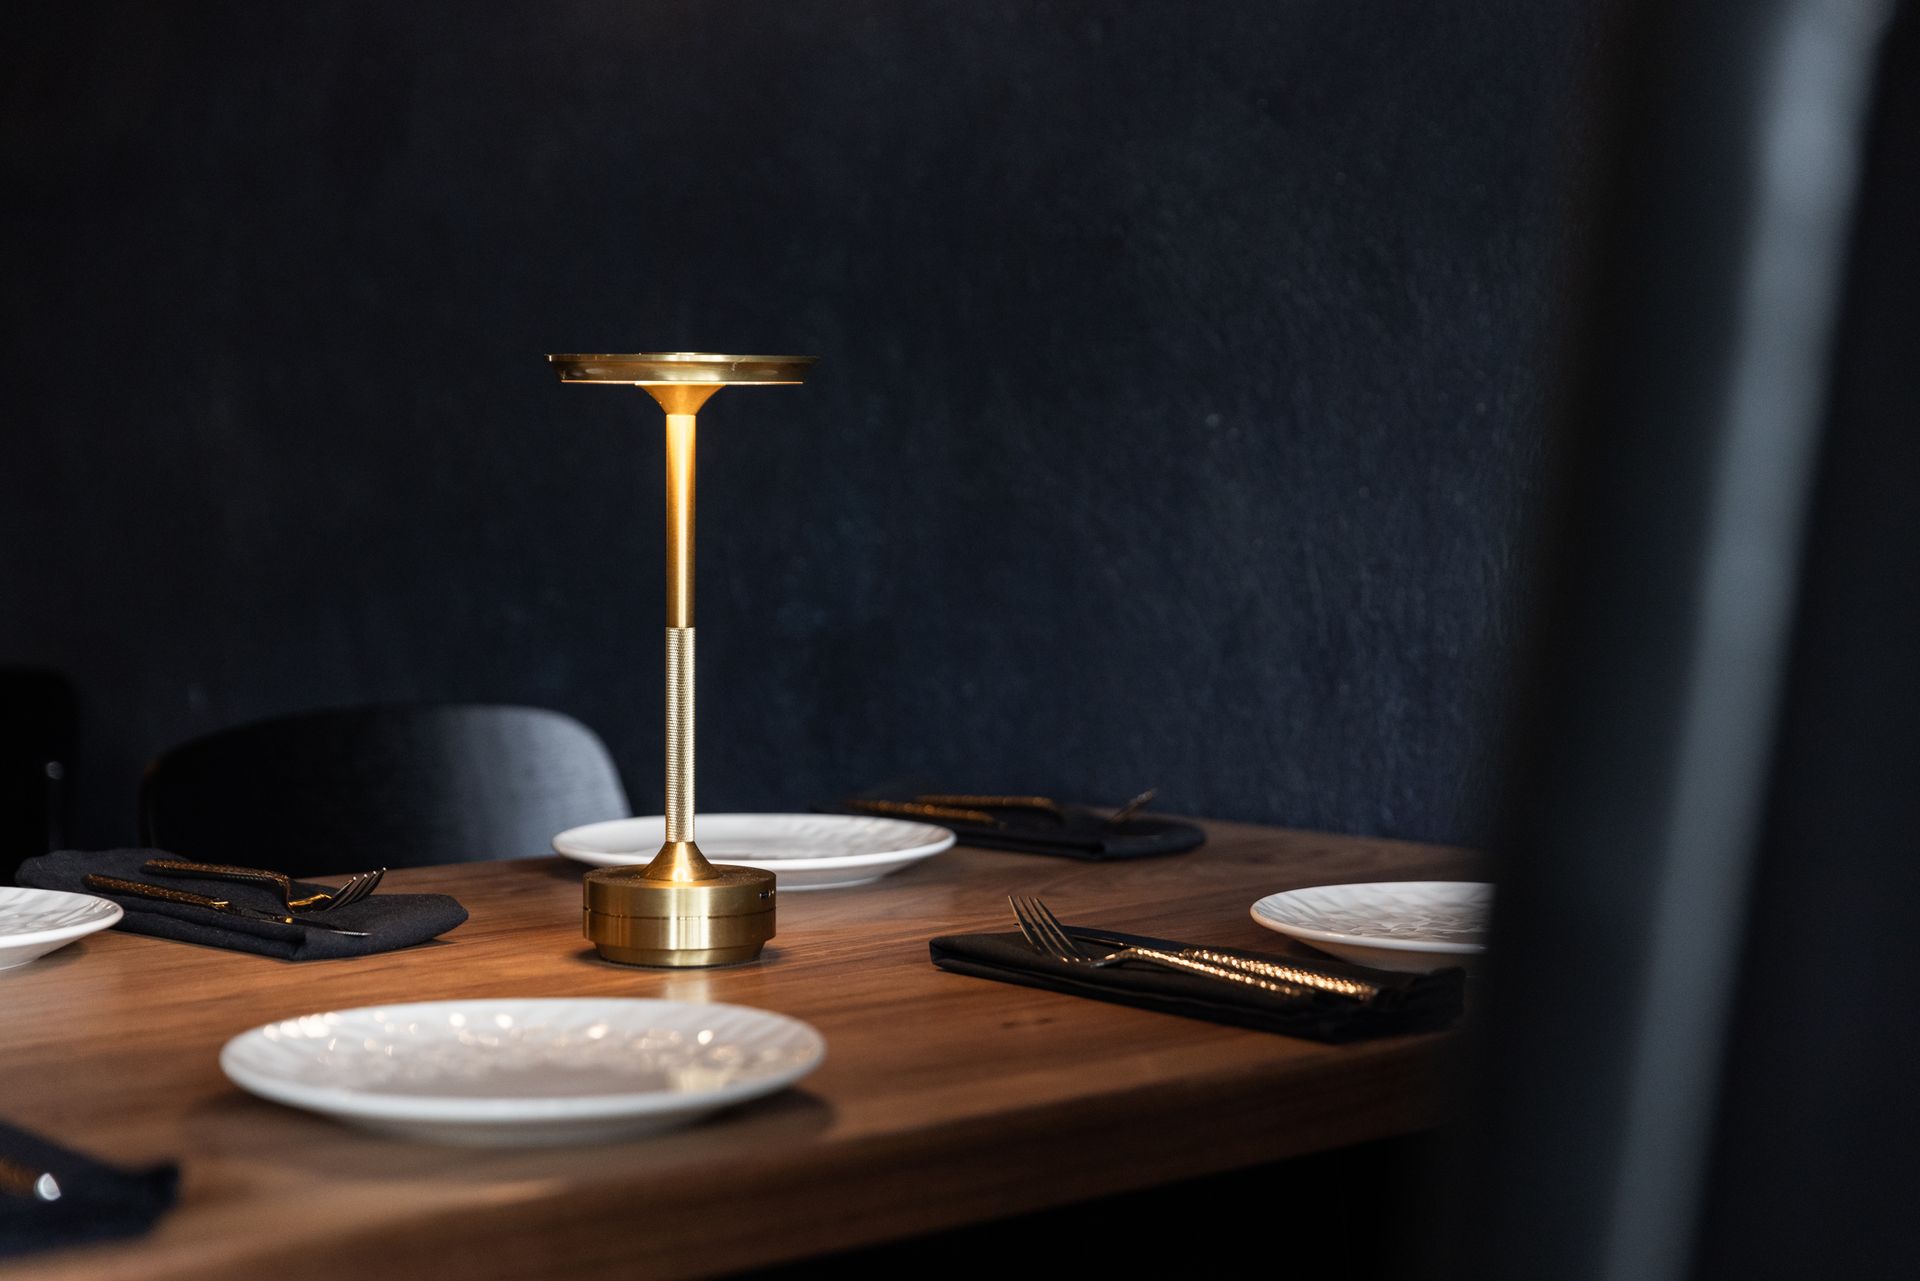 A table with plates and a lamp on it.